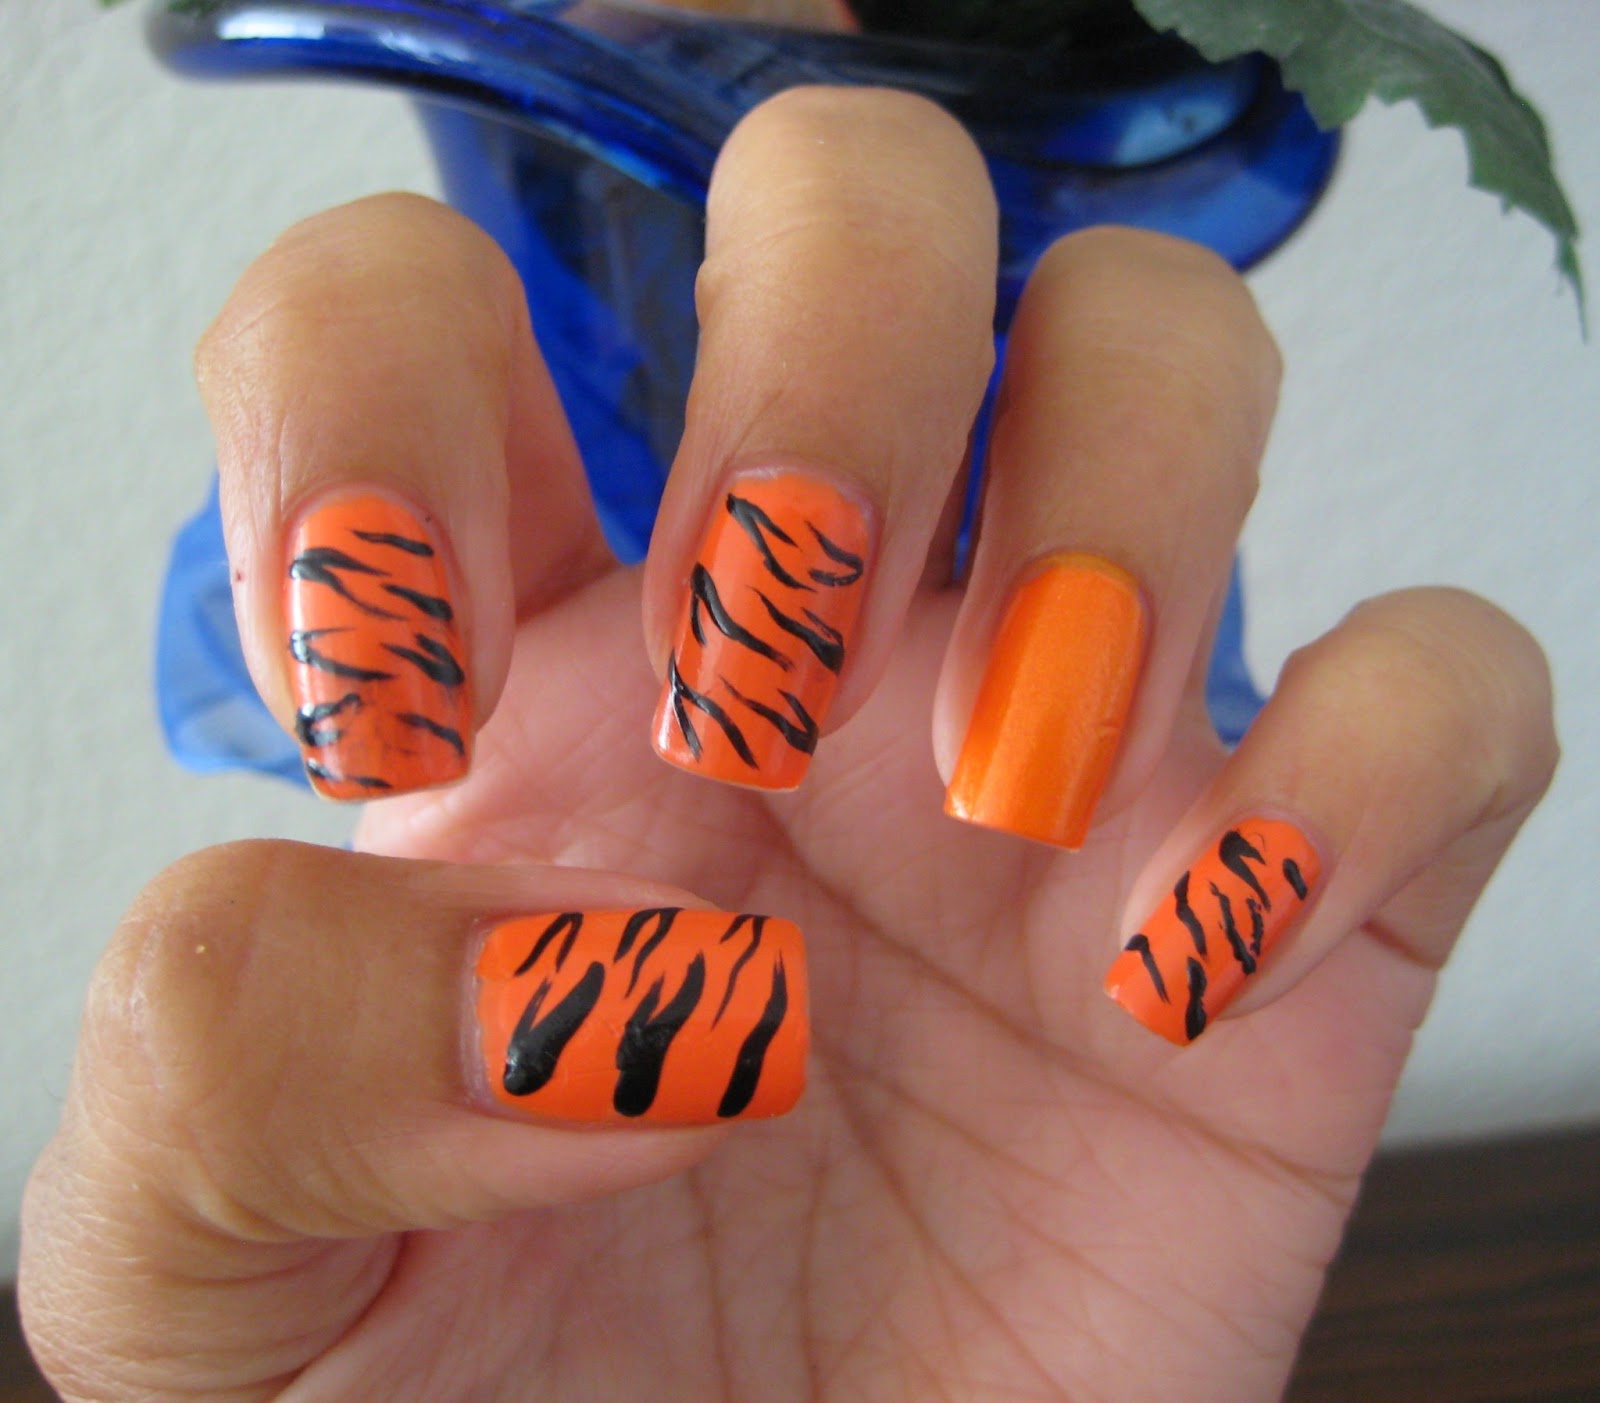 5 Finger Discount Cute Holiday Nail Art on a budget Tiger Nails...RAWR!